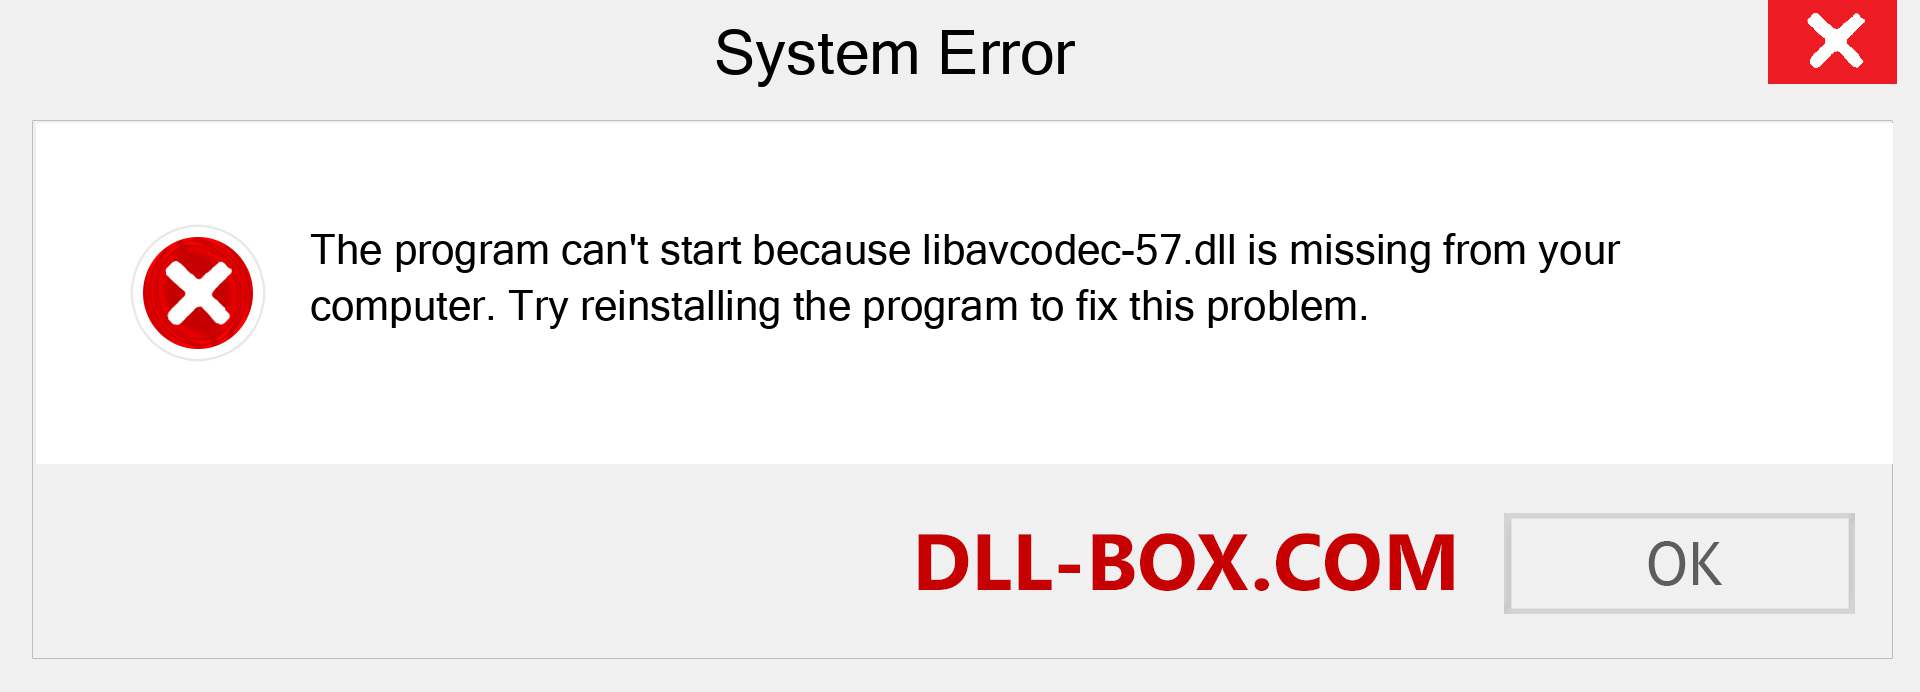  libavcodec-57.dll file is missing?. Download for Windows 7, 8, 10 - Fix  libavcodec-57 dll Missing Error on Windows, photos, images